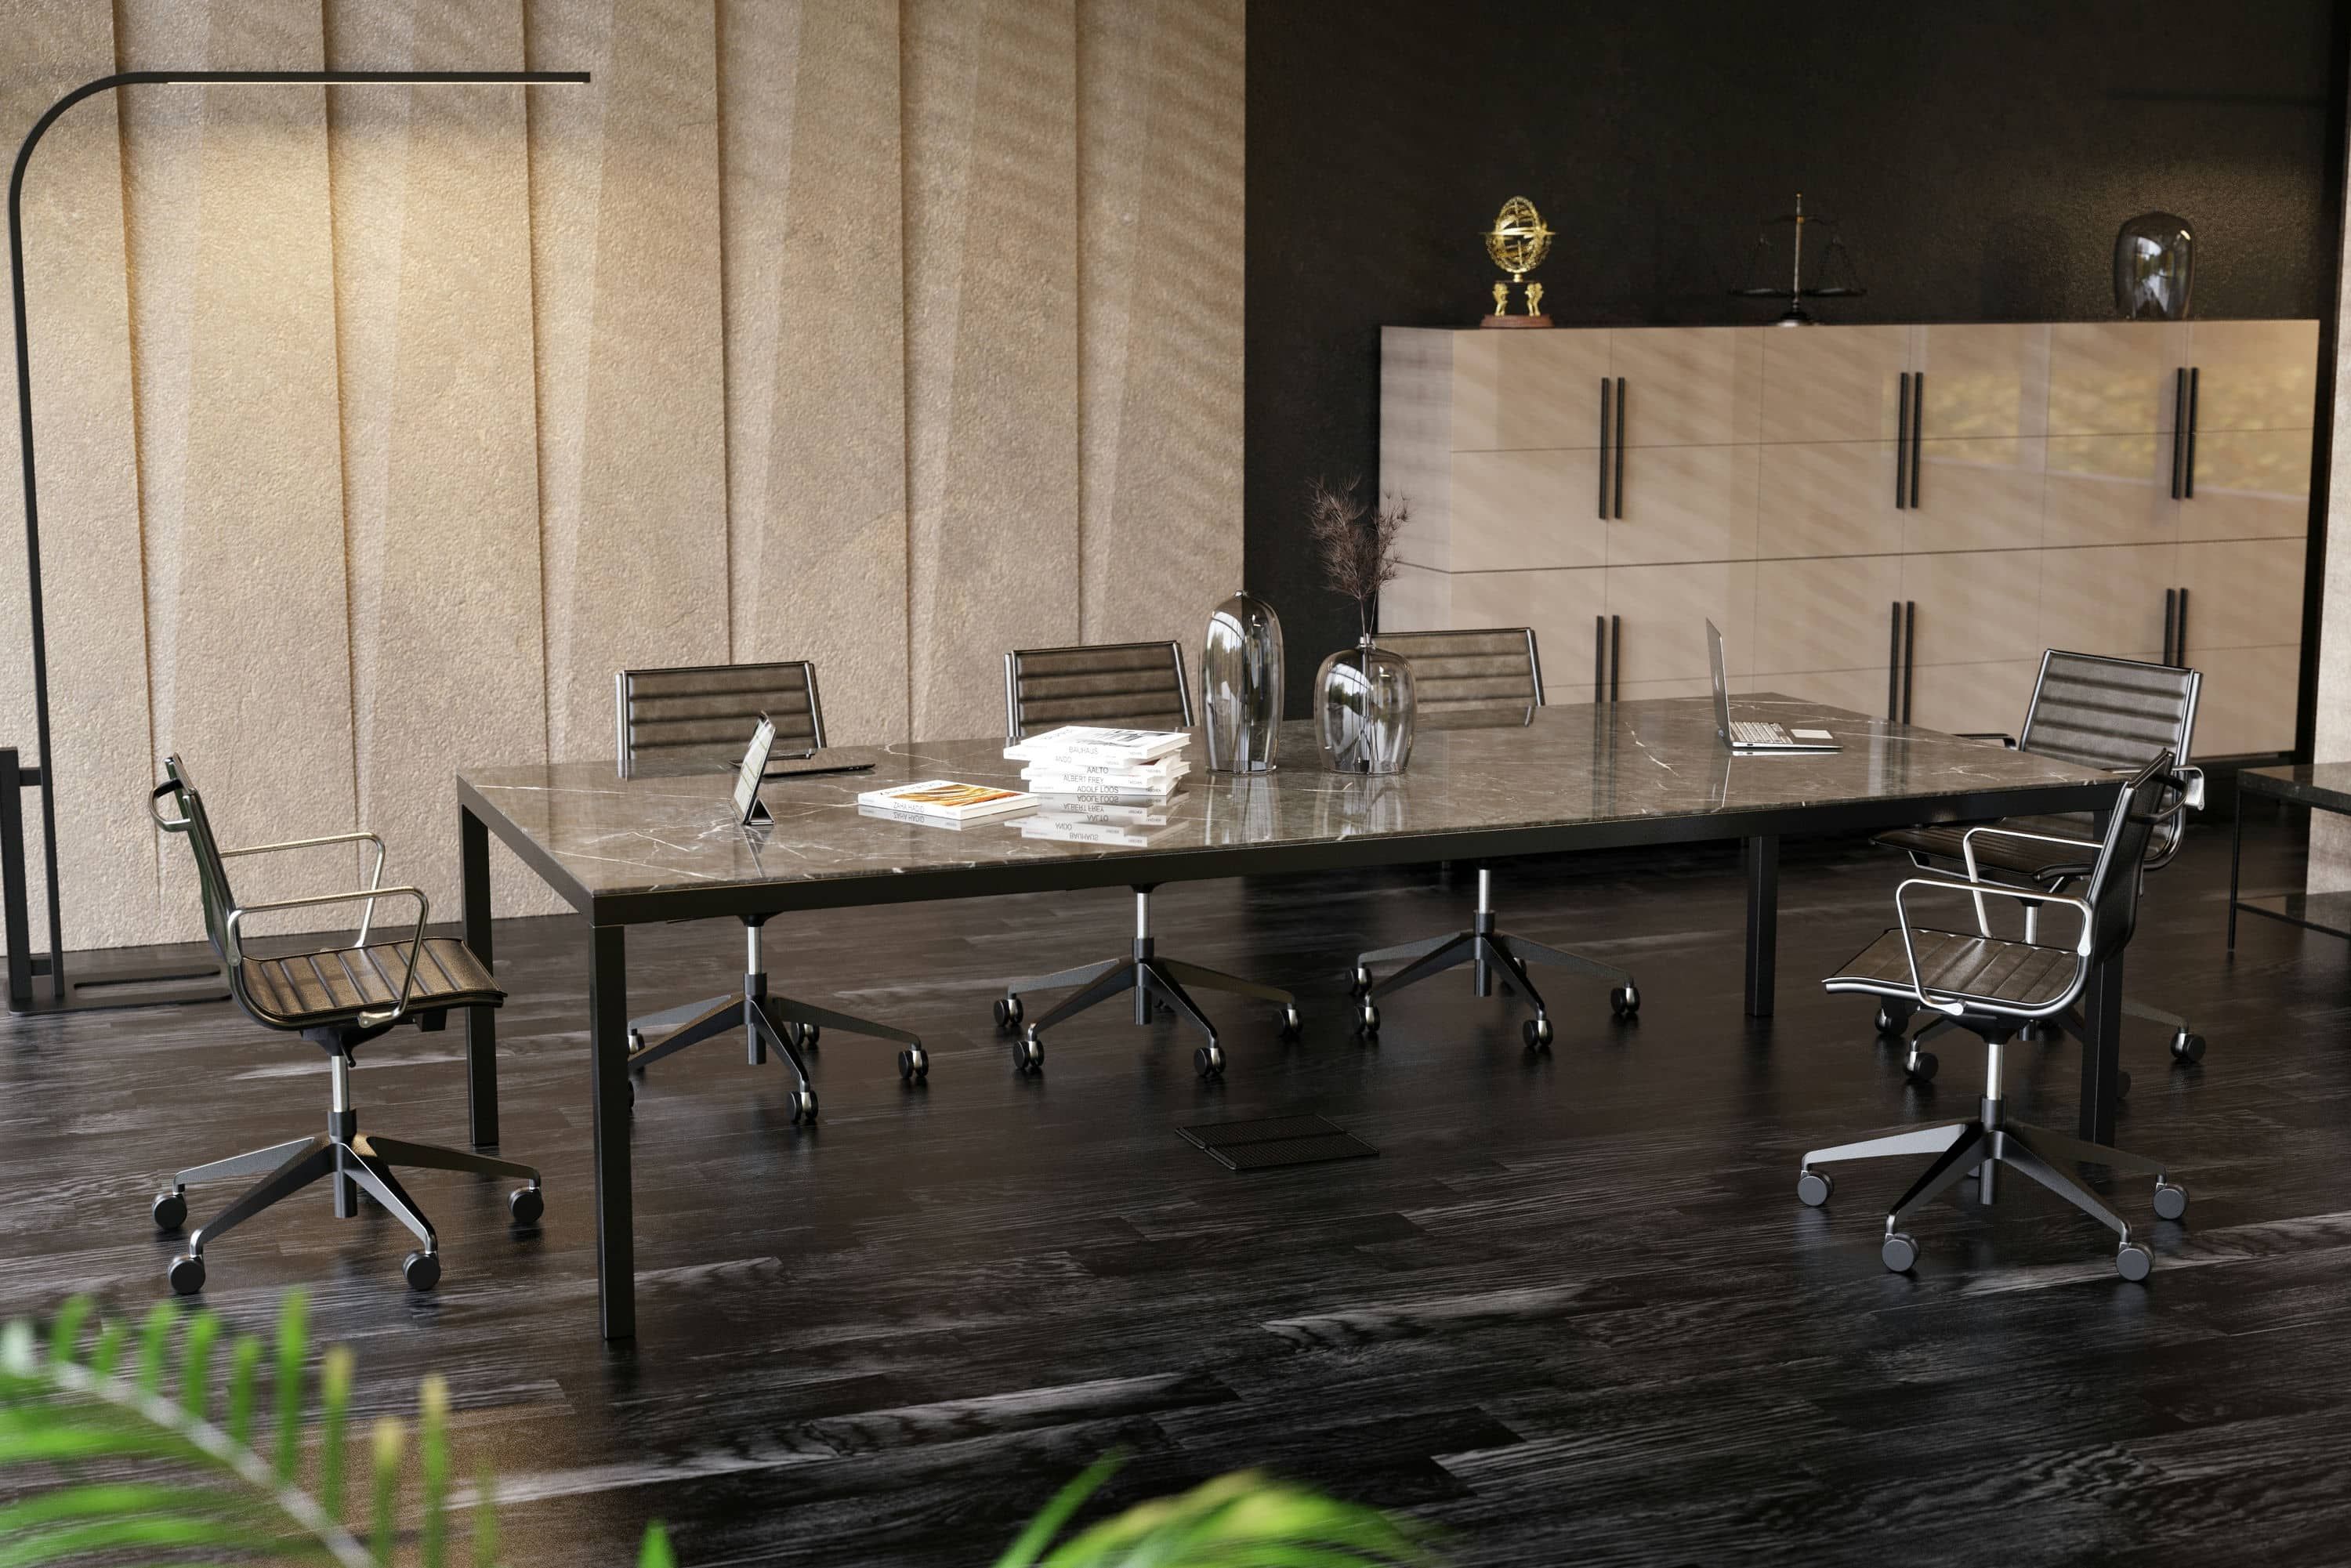 Office environment with Sierra dining table